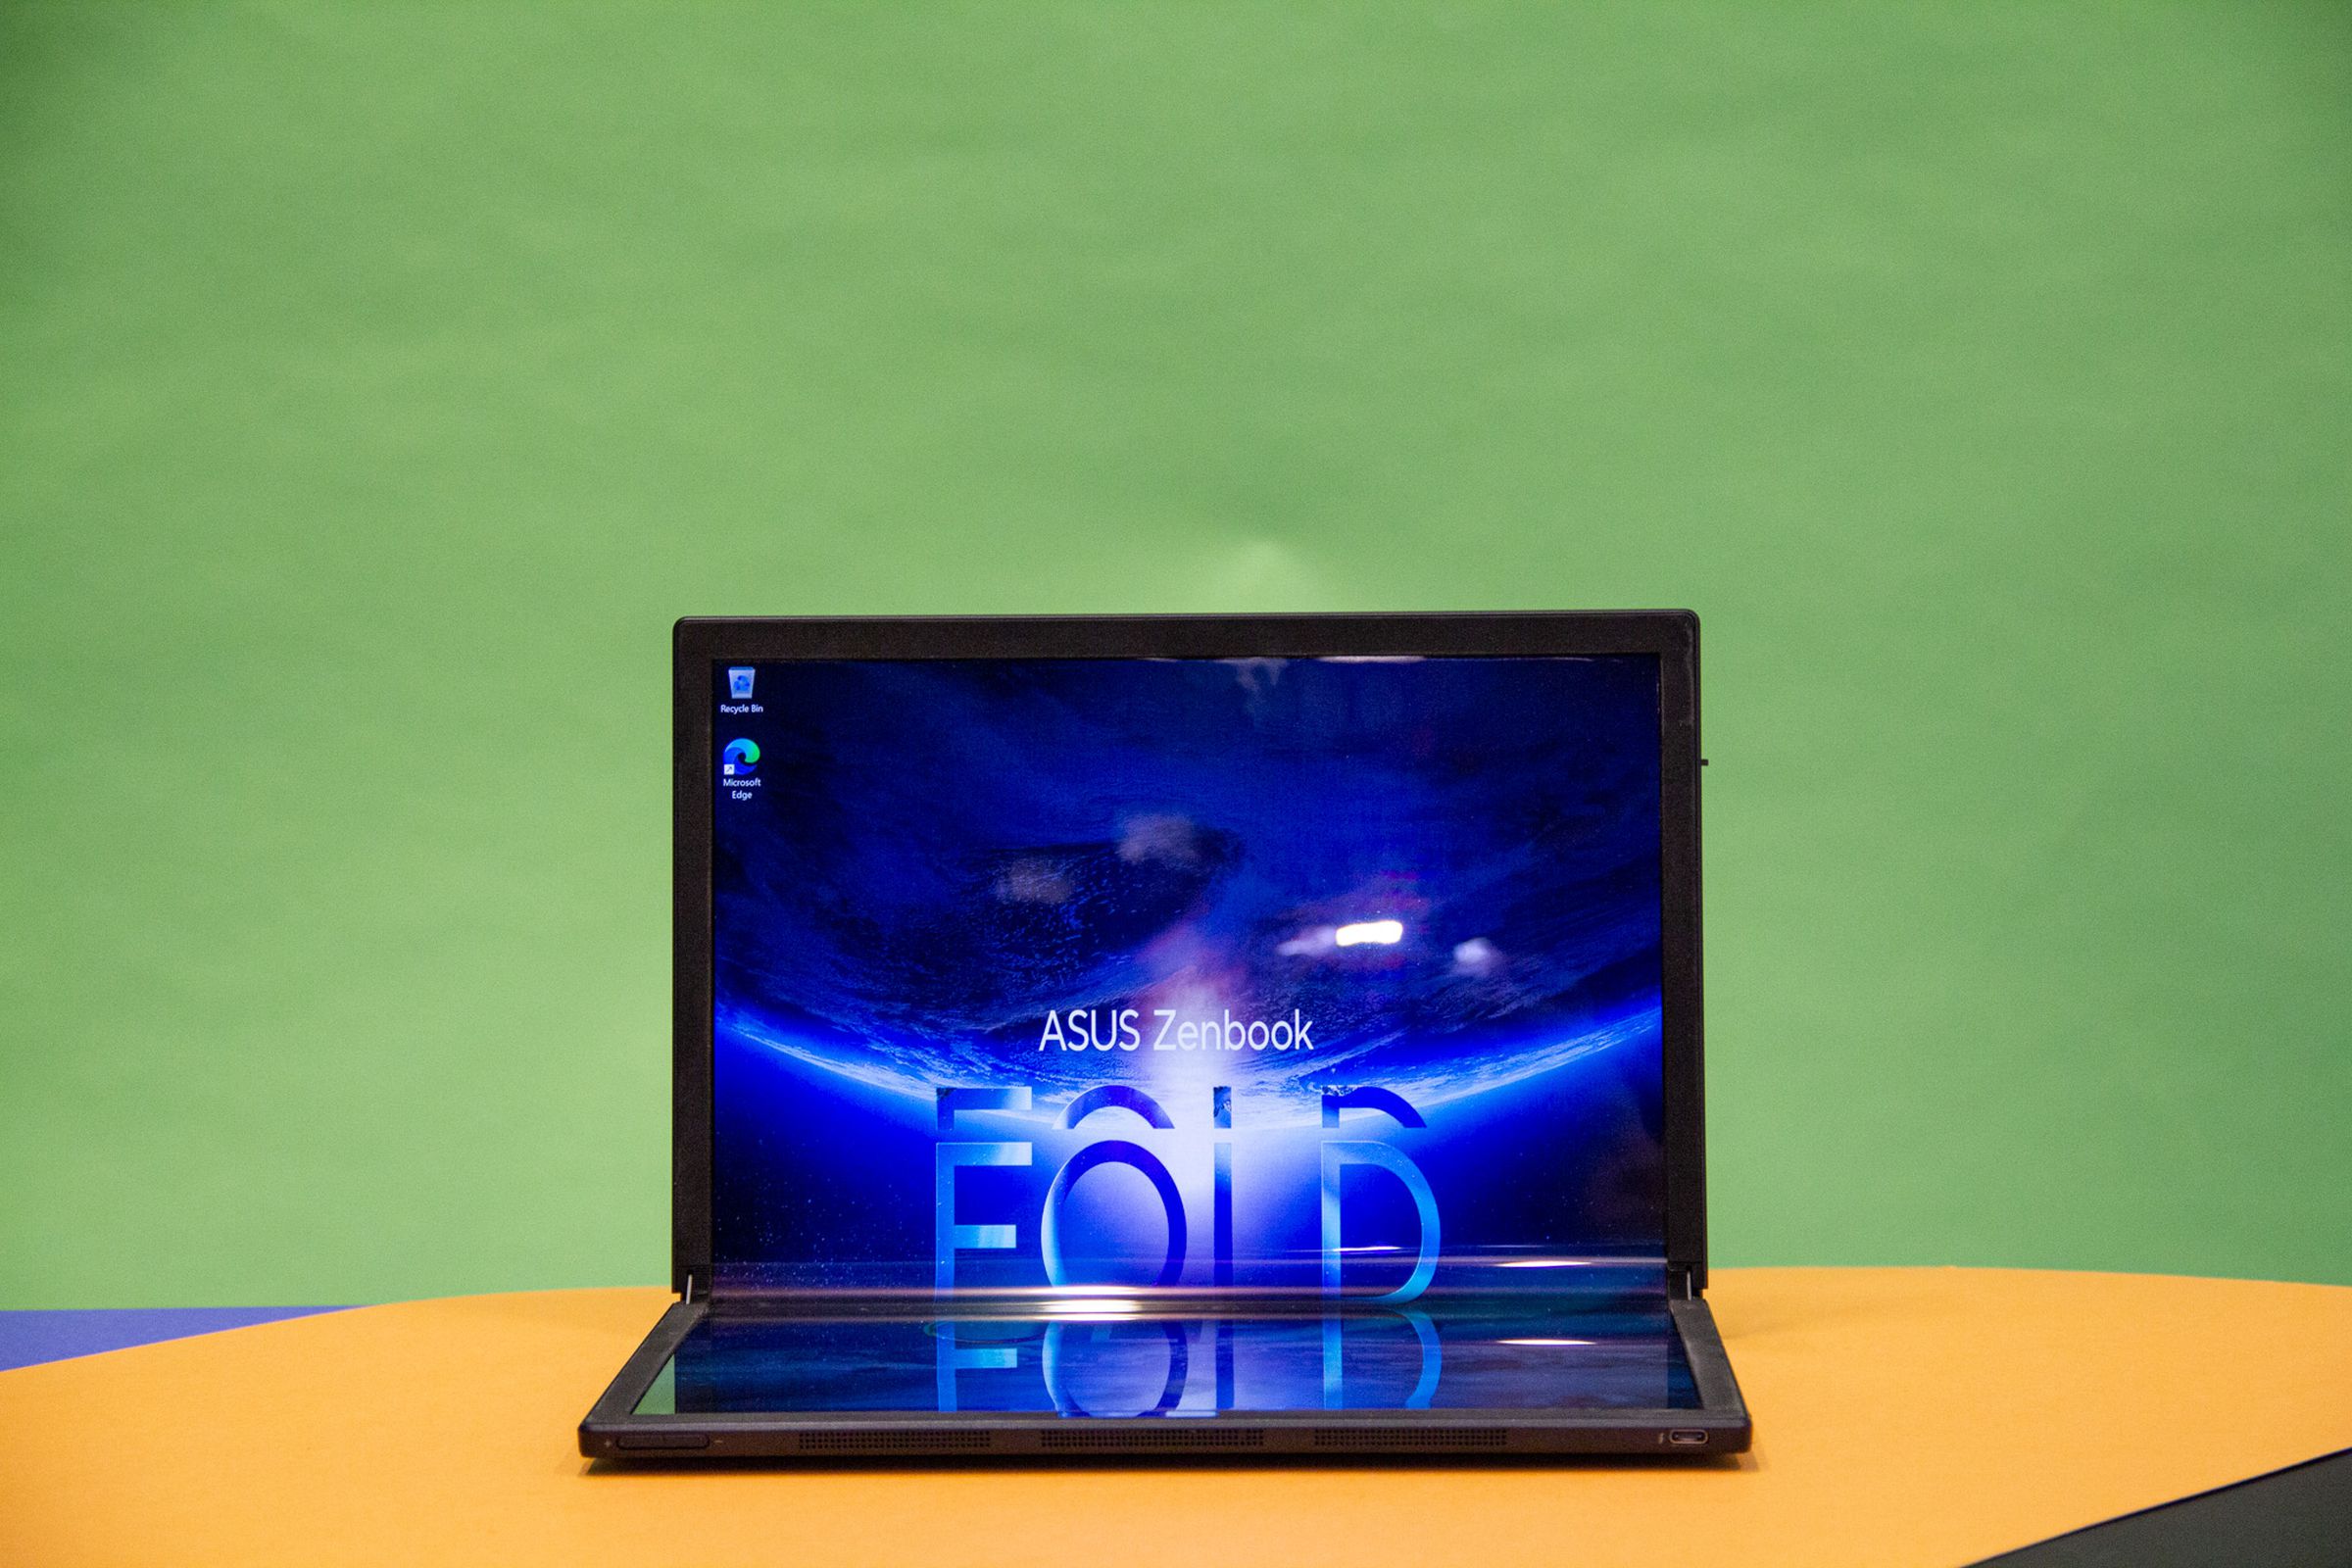 The Asus Zenbook 17 Fold OLED in laptop mode without the keyboard attached.